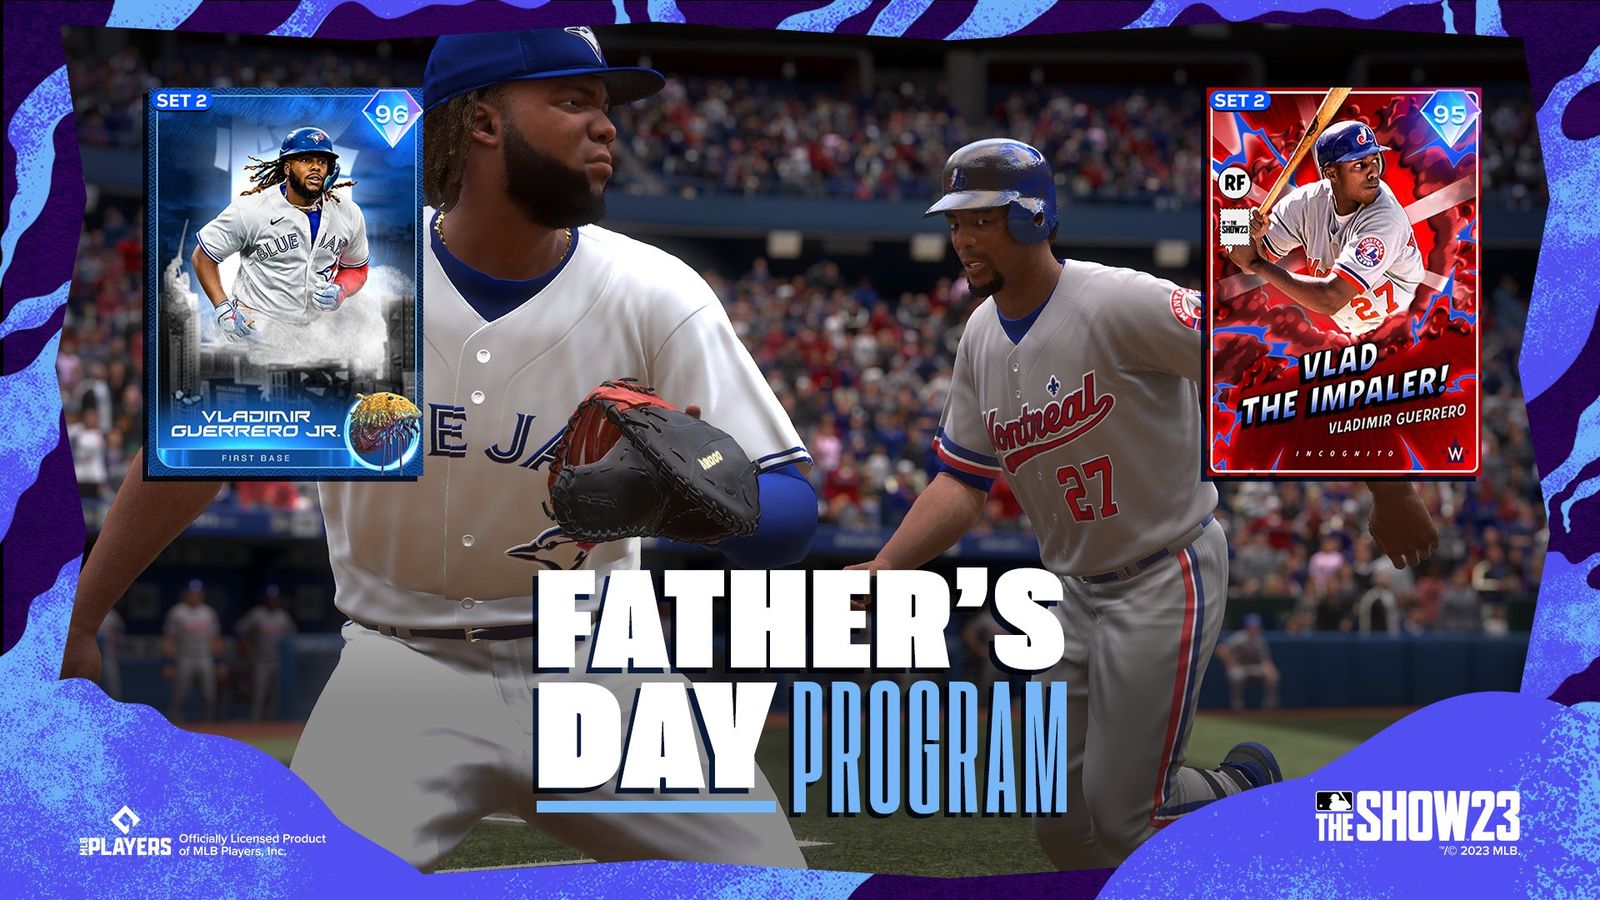 MLB The Show 23 Father's Day Program Cards